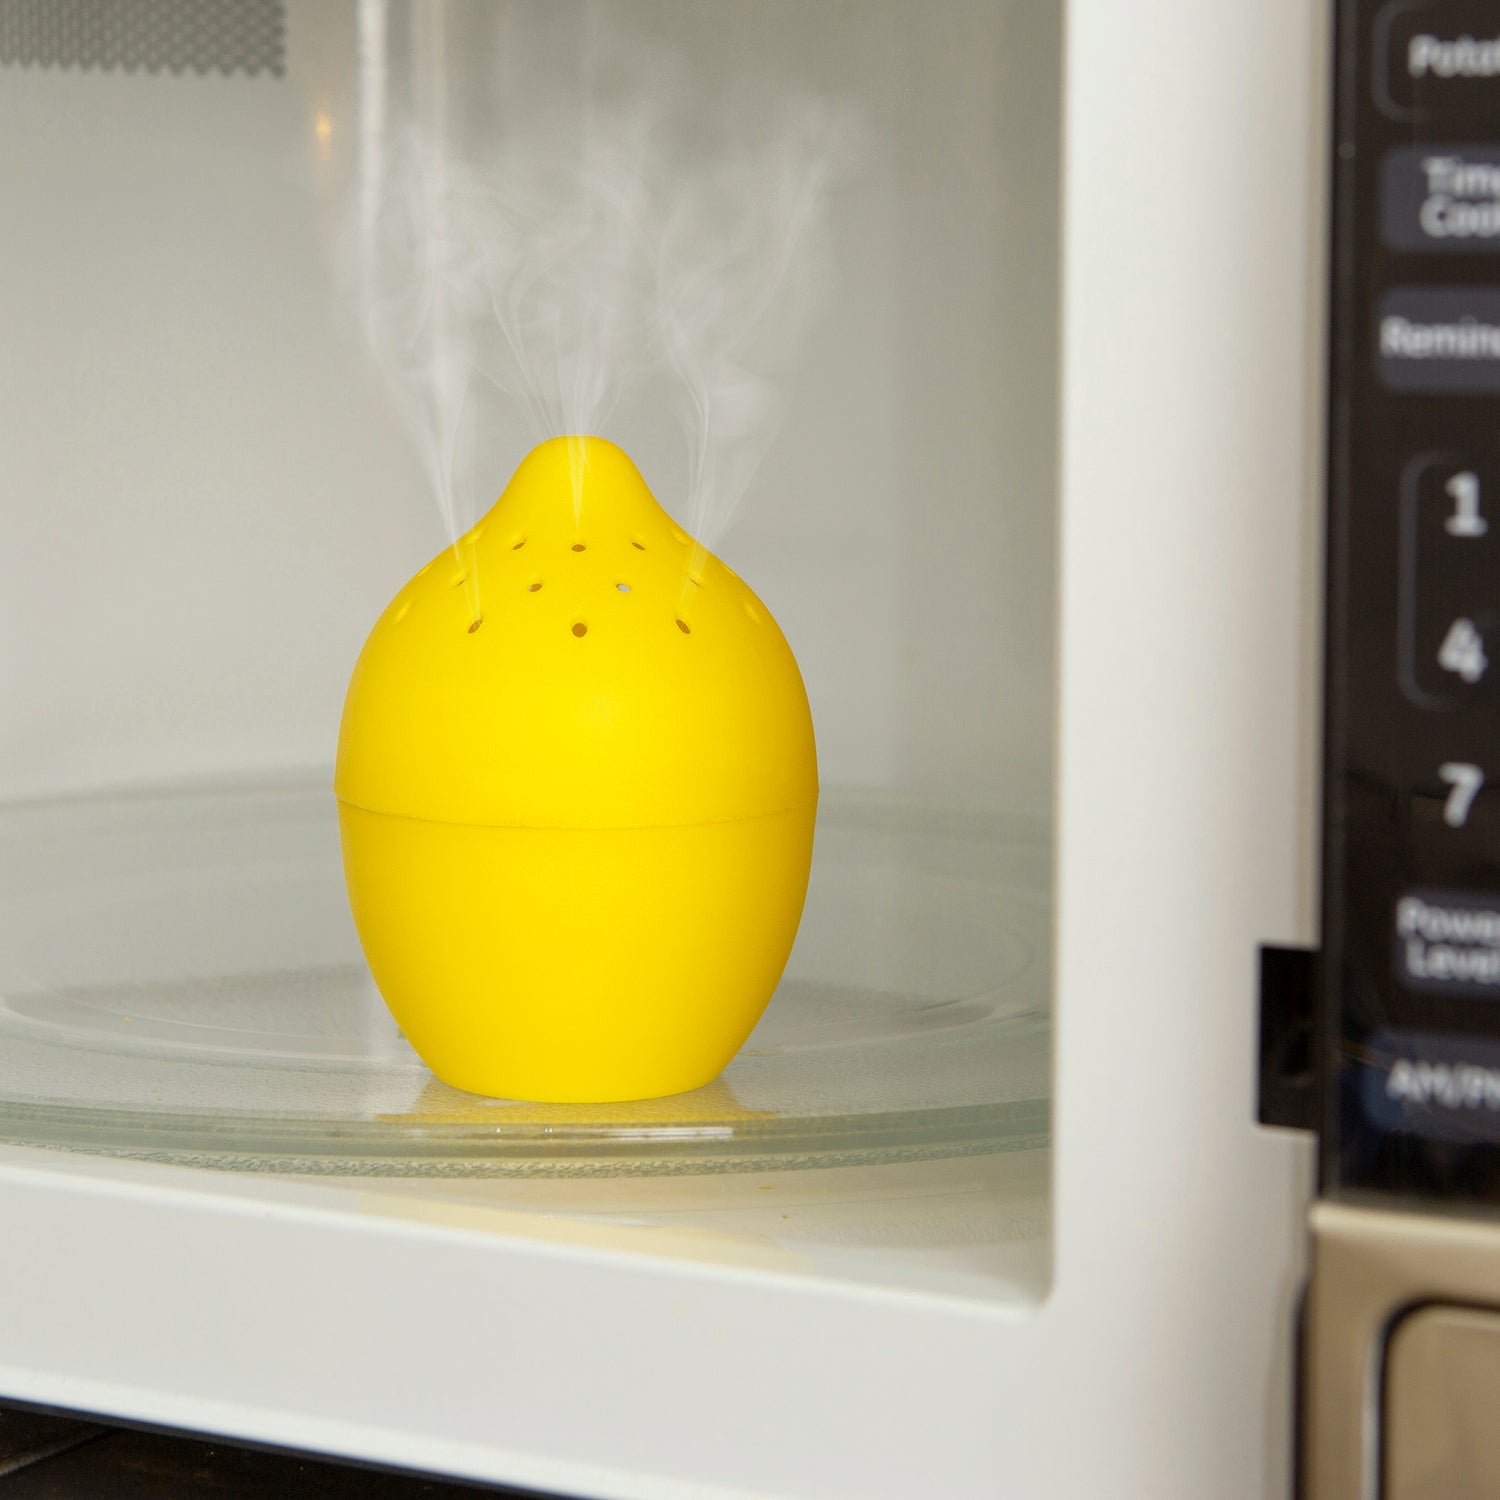 Homemade Microwave Cleaner - The Make Your Own Zone